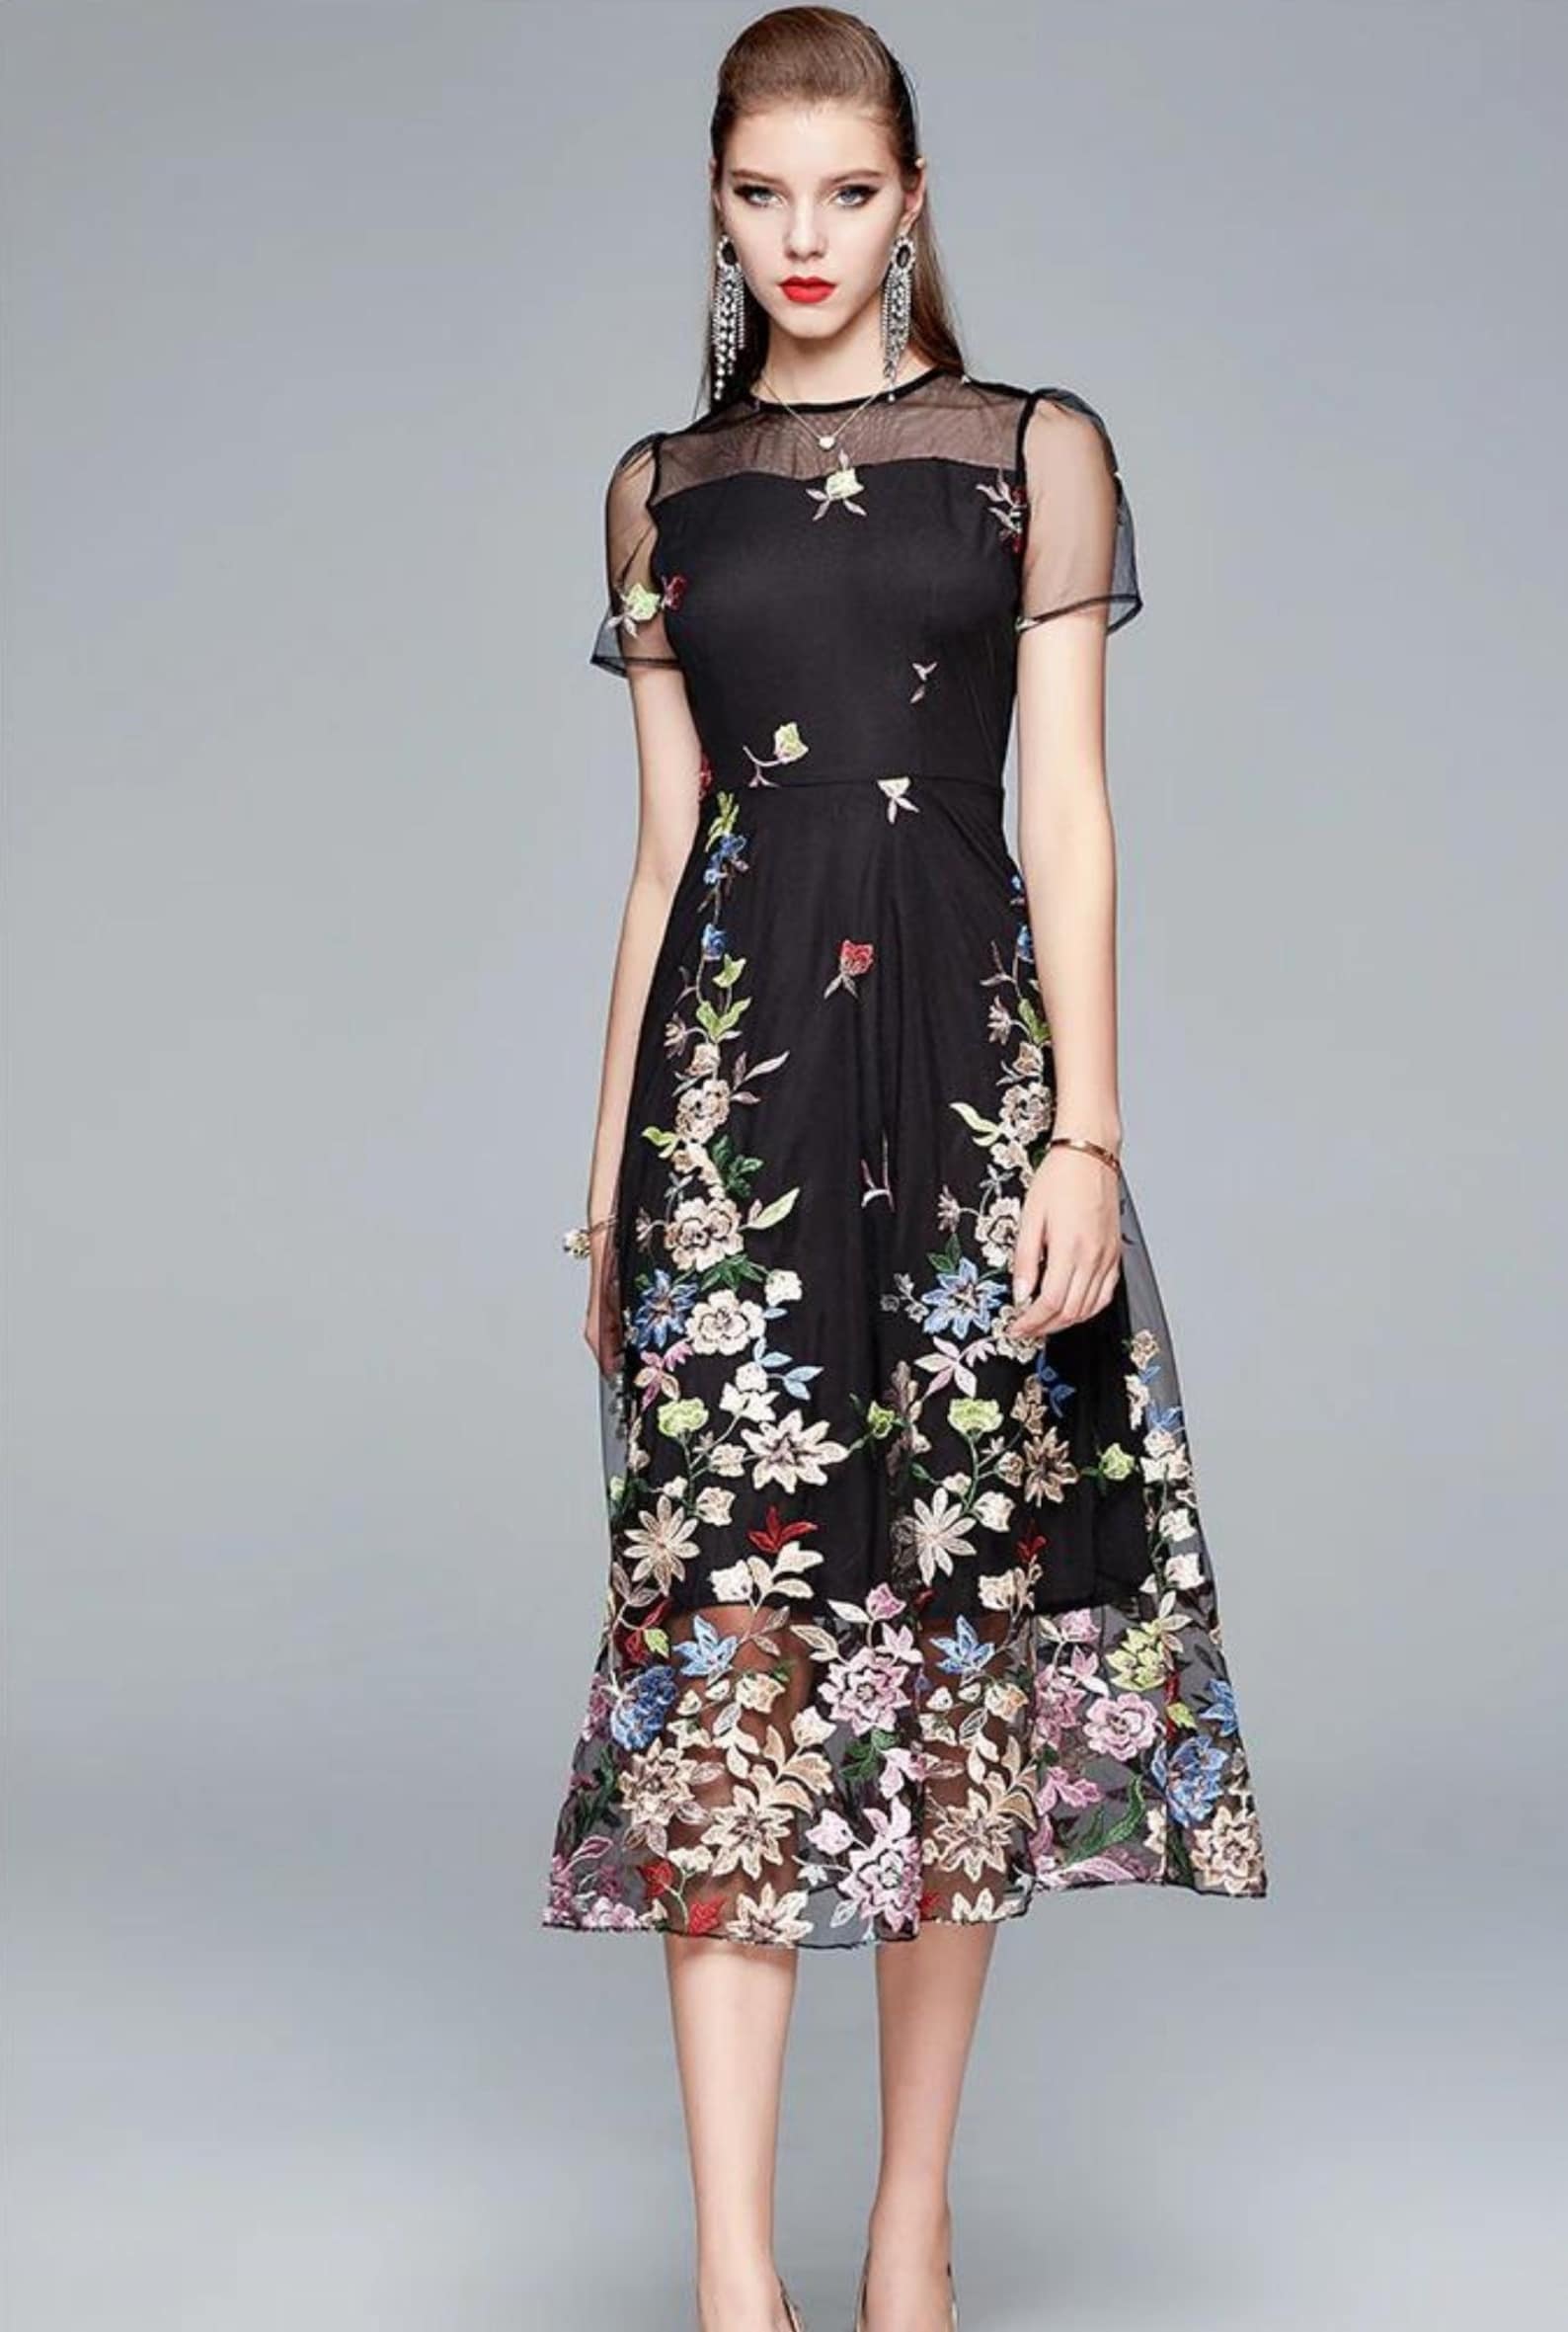 Floral Embroidery Dress Mesh Patchwork Women Summer Fashion - Etsy